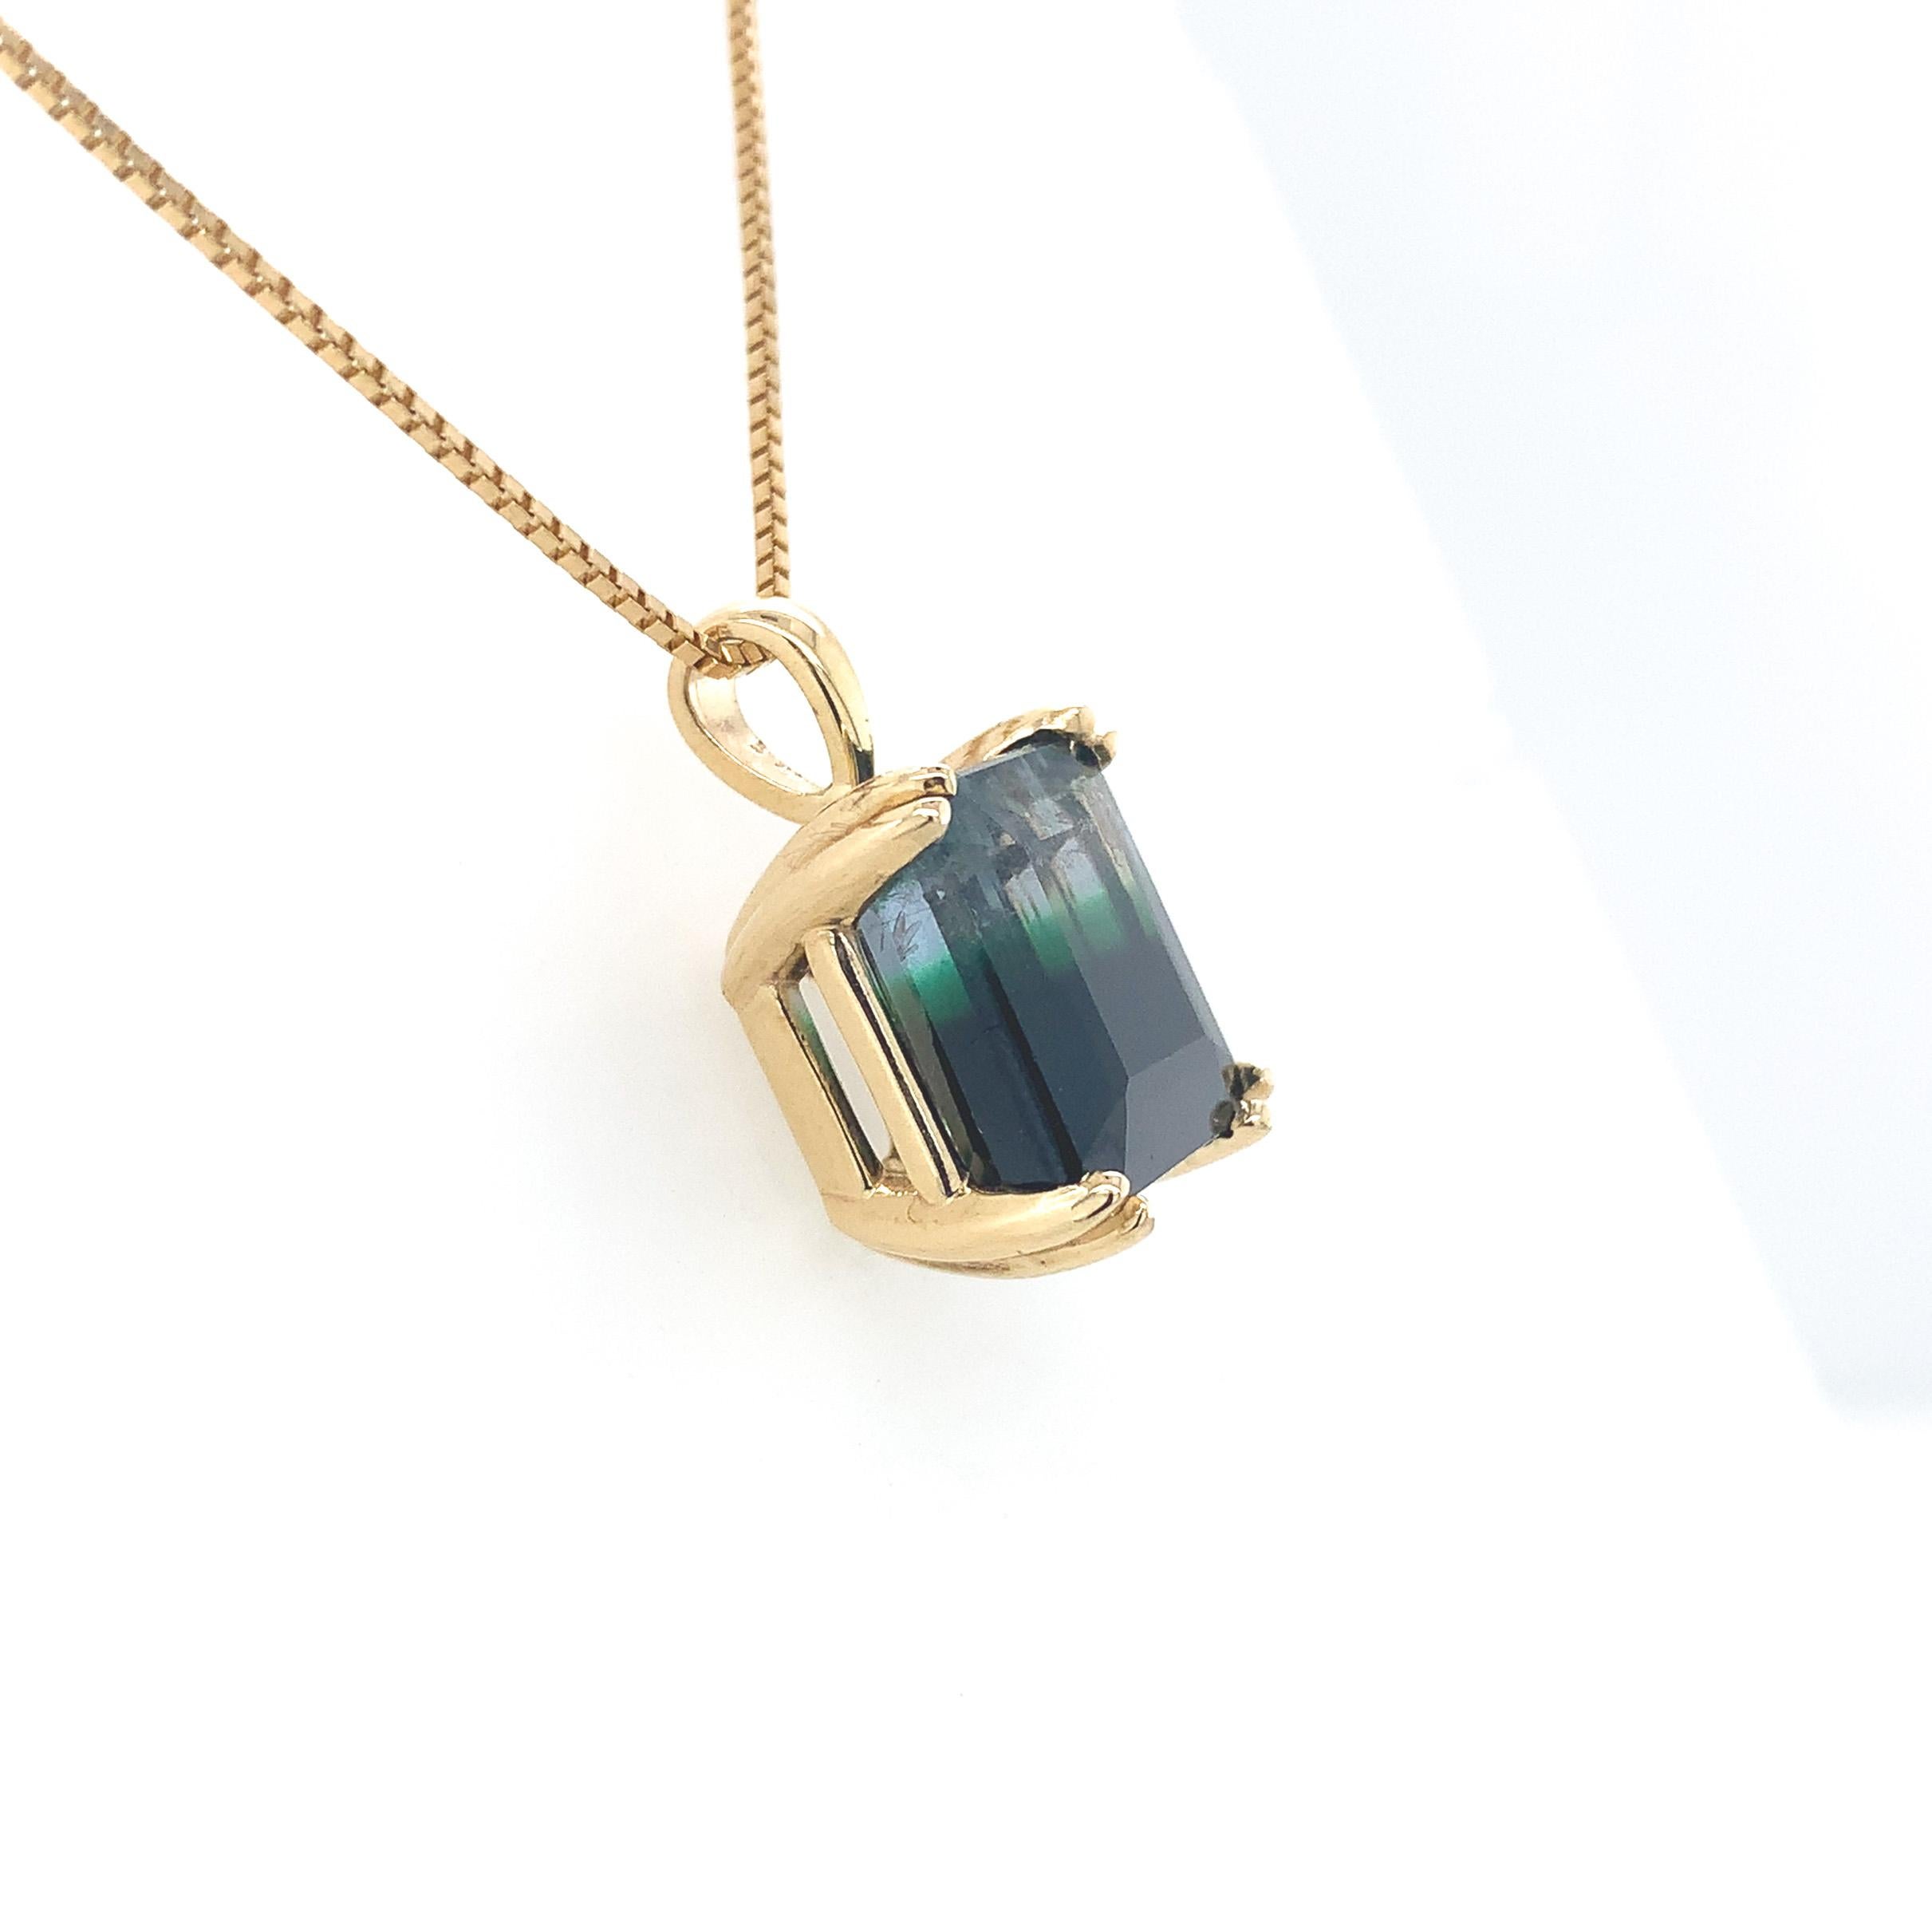 14K yellow gold pendant featuring a bi-color tourmaline weighing 7.92 carats. The tourmaline has color from clear to green to very dark green, almost black. The emerald cut tourmaline measures about 11.5mm x 10mm. The tourmaline is set in a